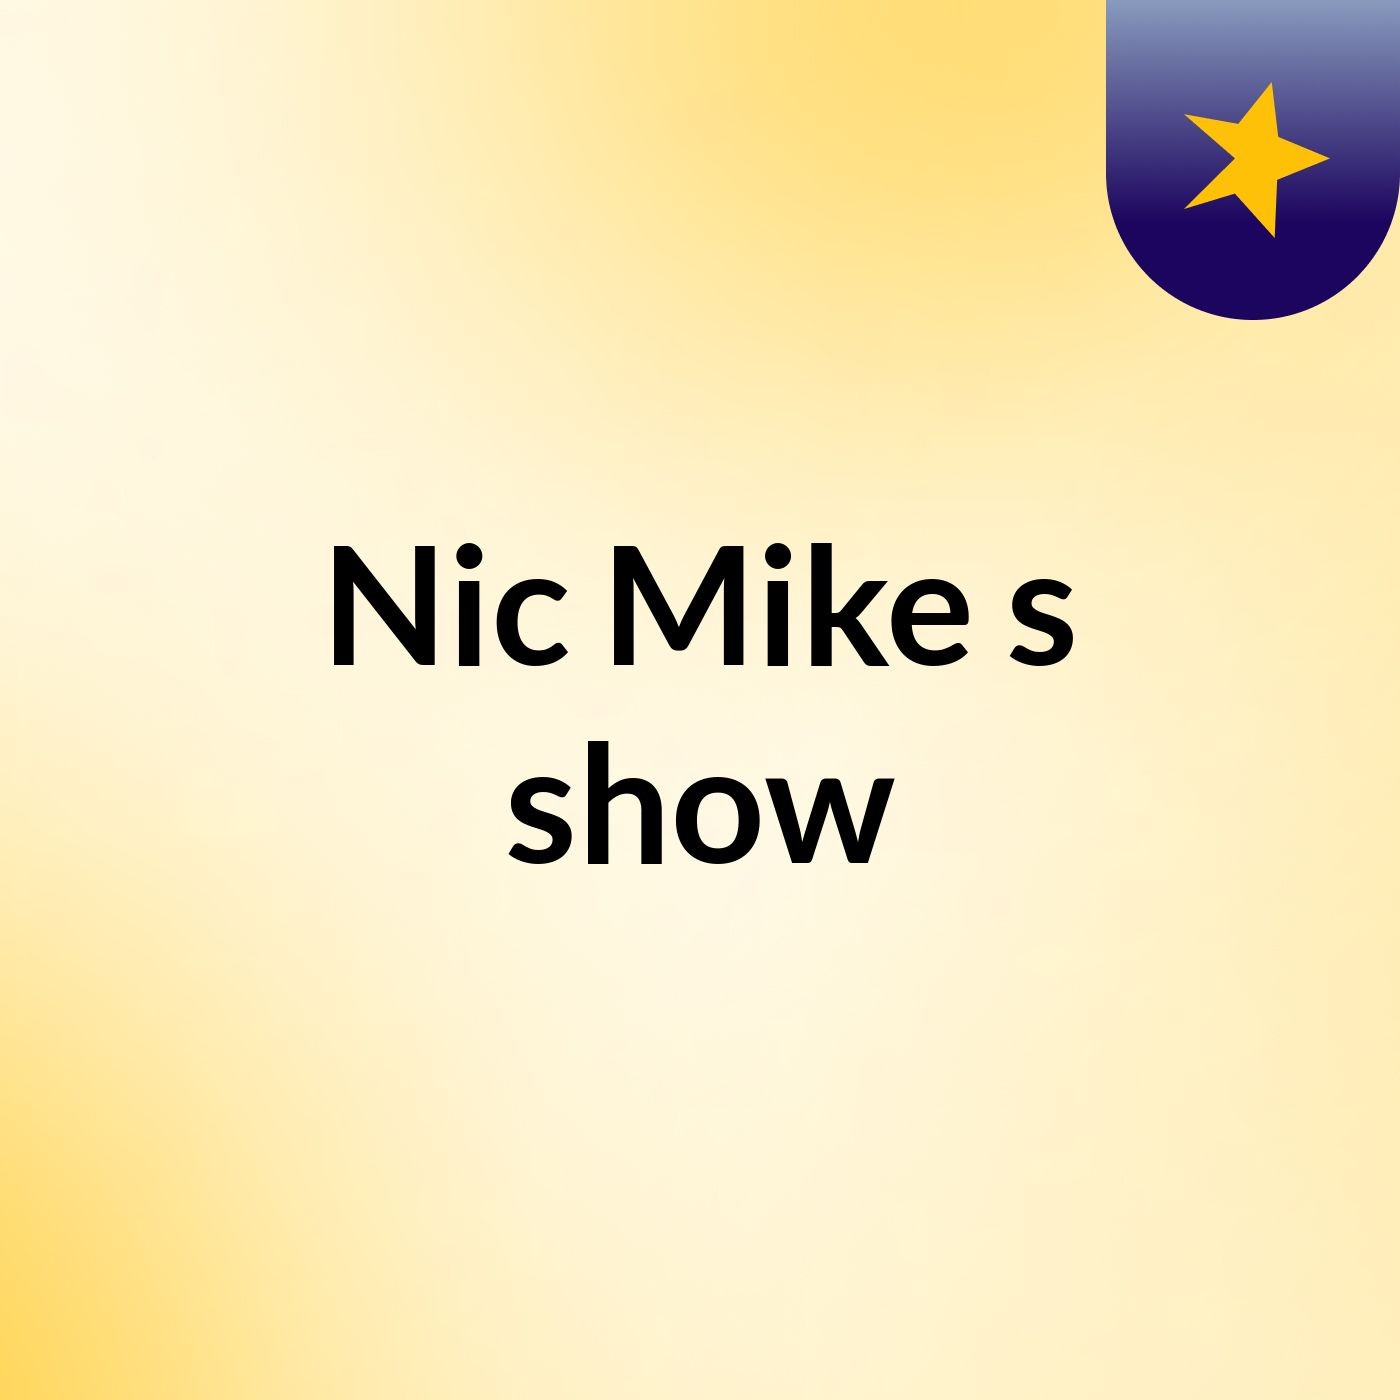 Nic Mike's show